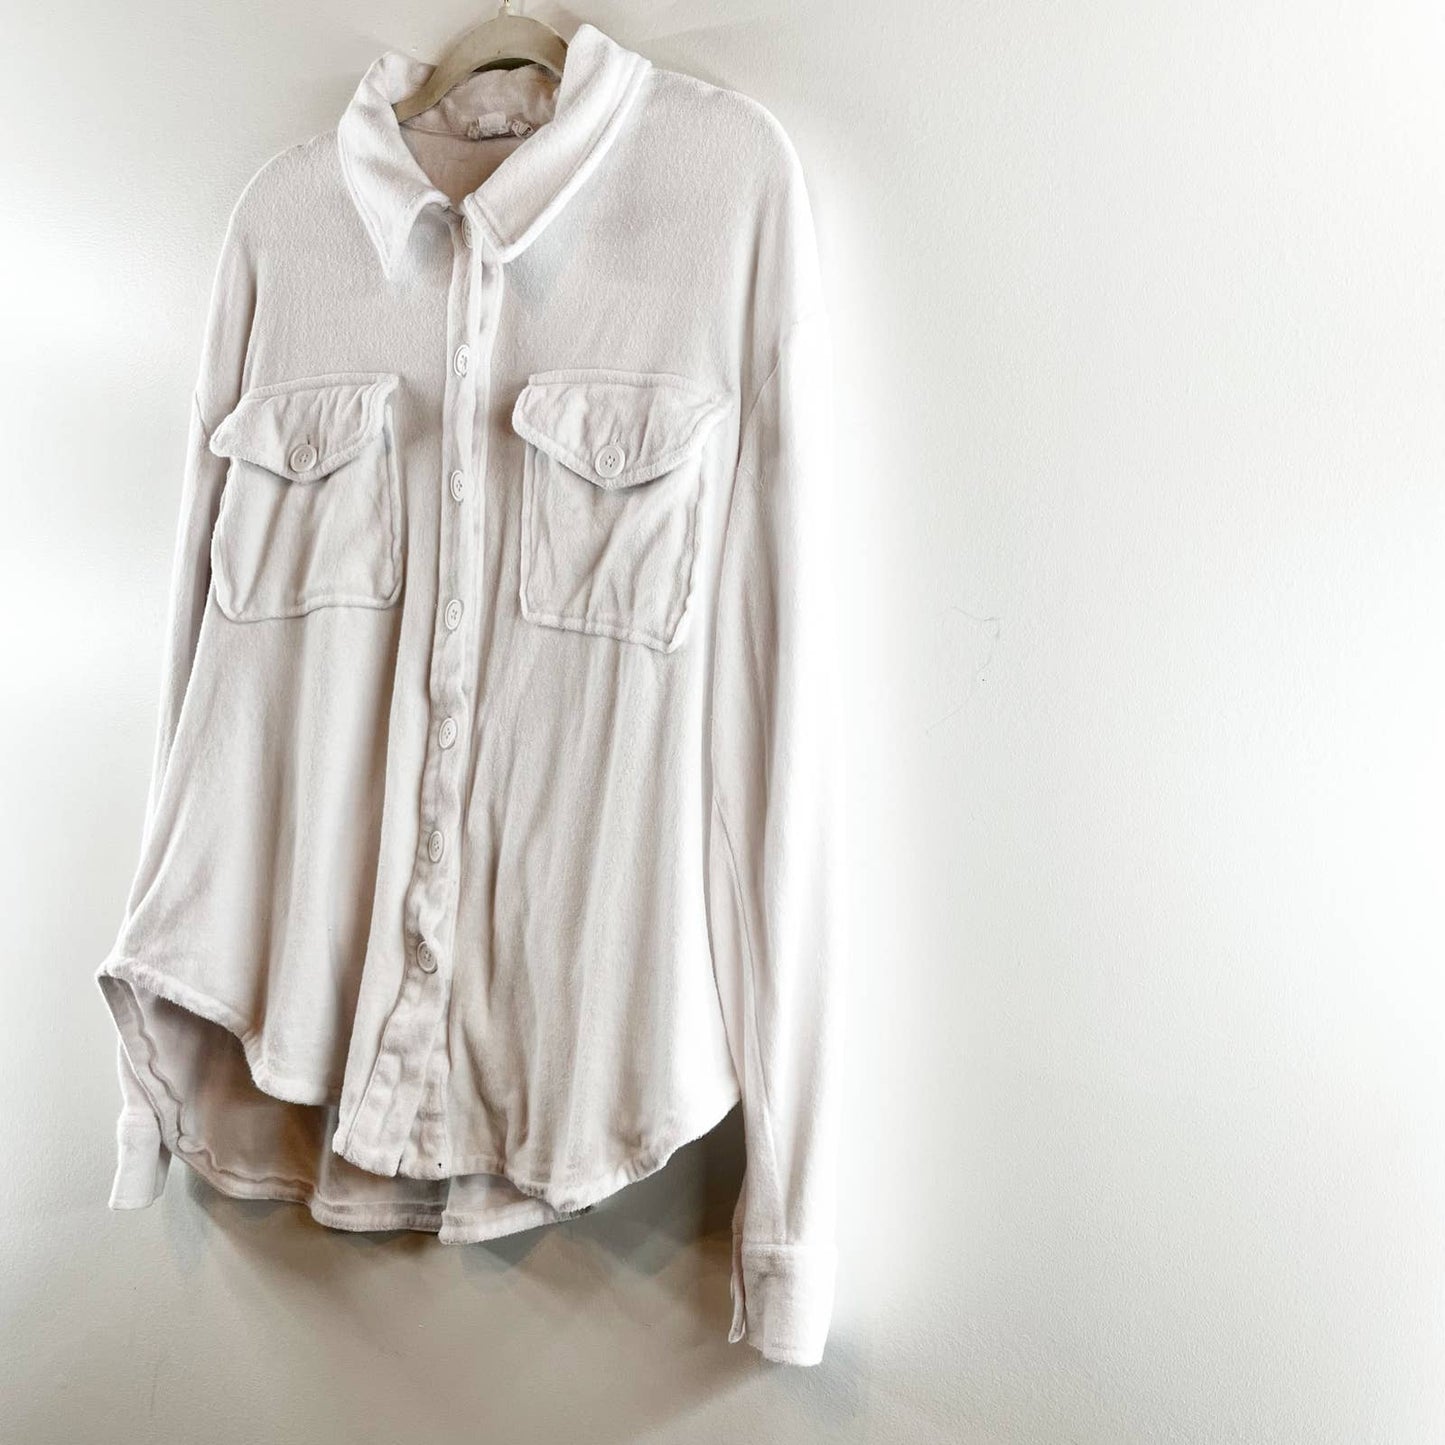 Good American Cotton Terry Long Sleeve Button Front Cover Up Shirt Jacket White